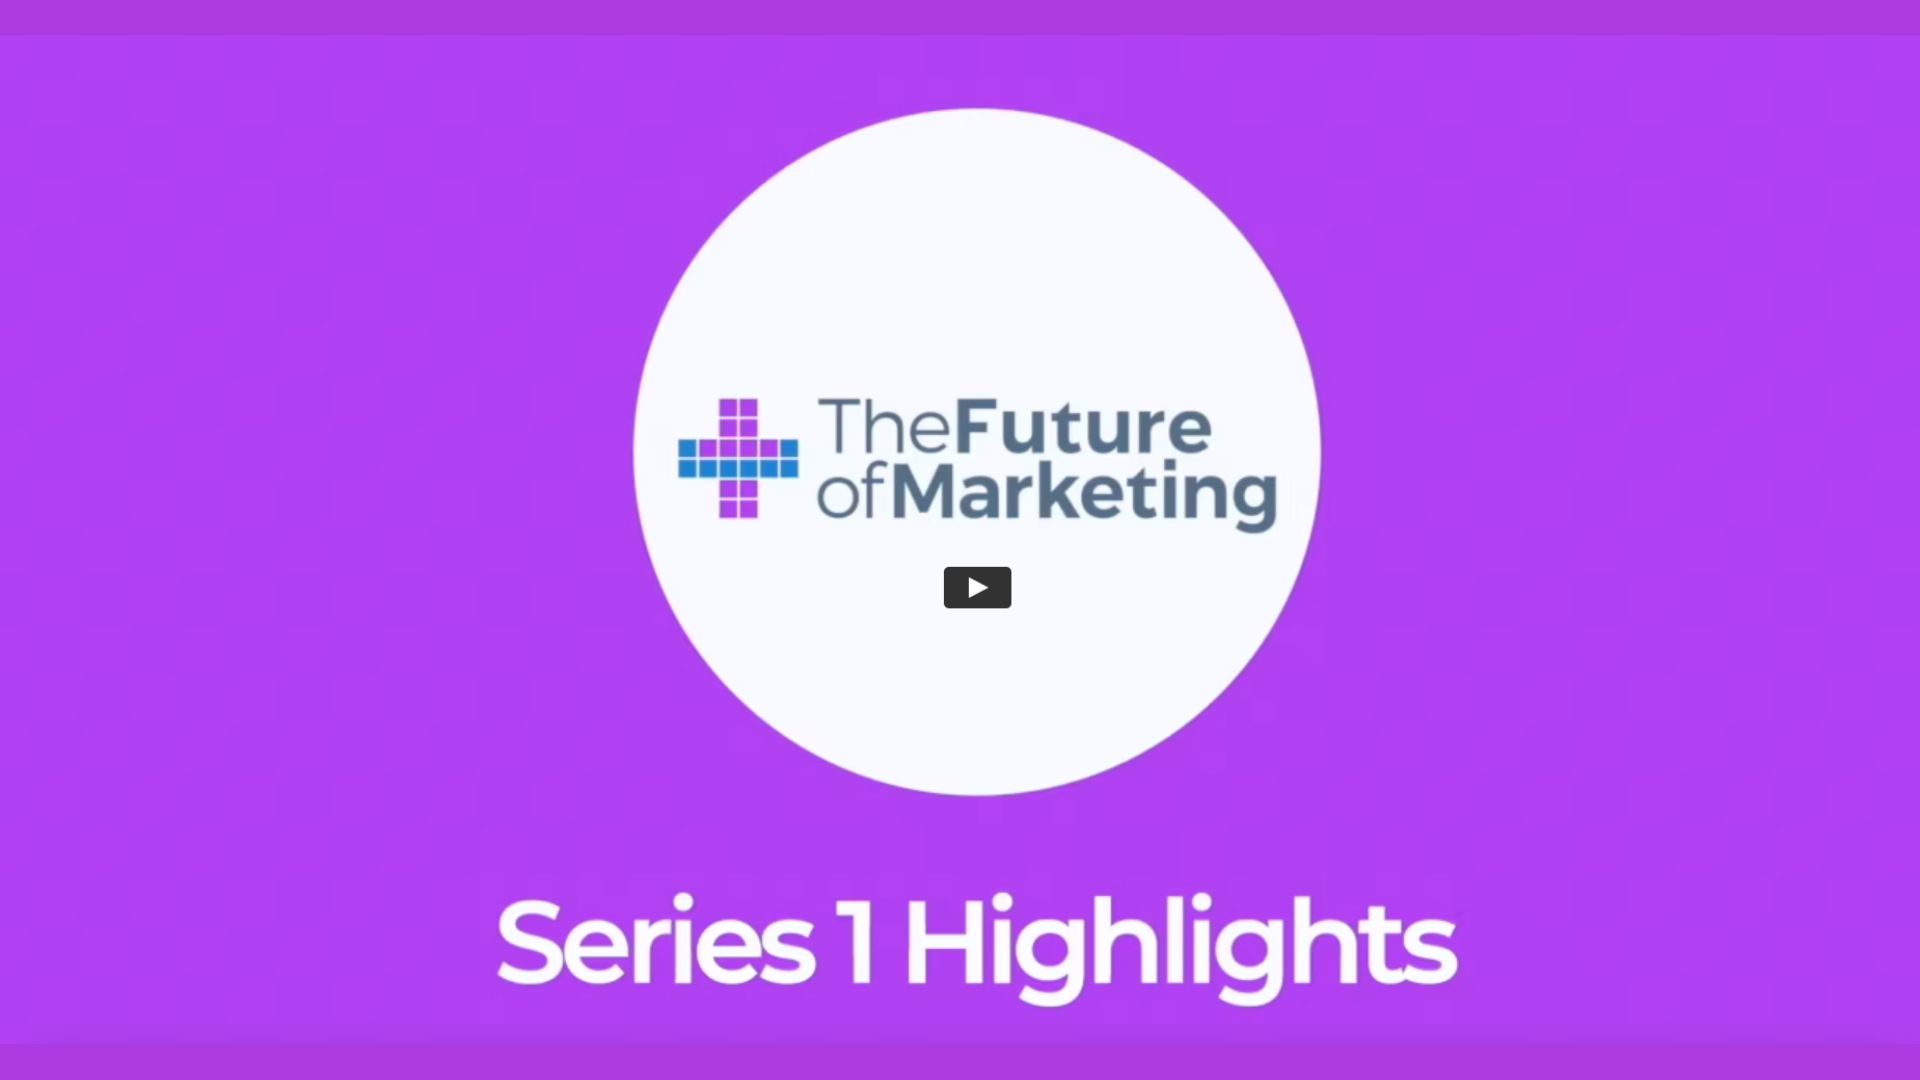 The Future of Marketing series highlights